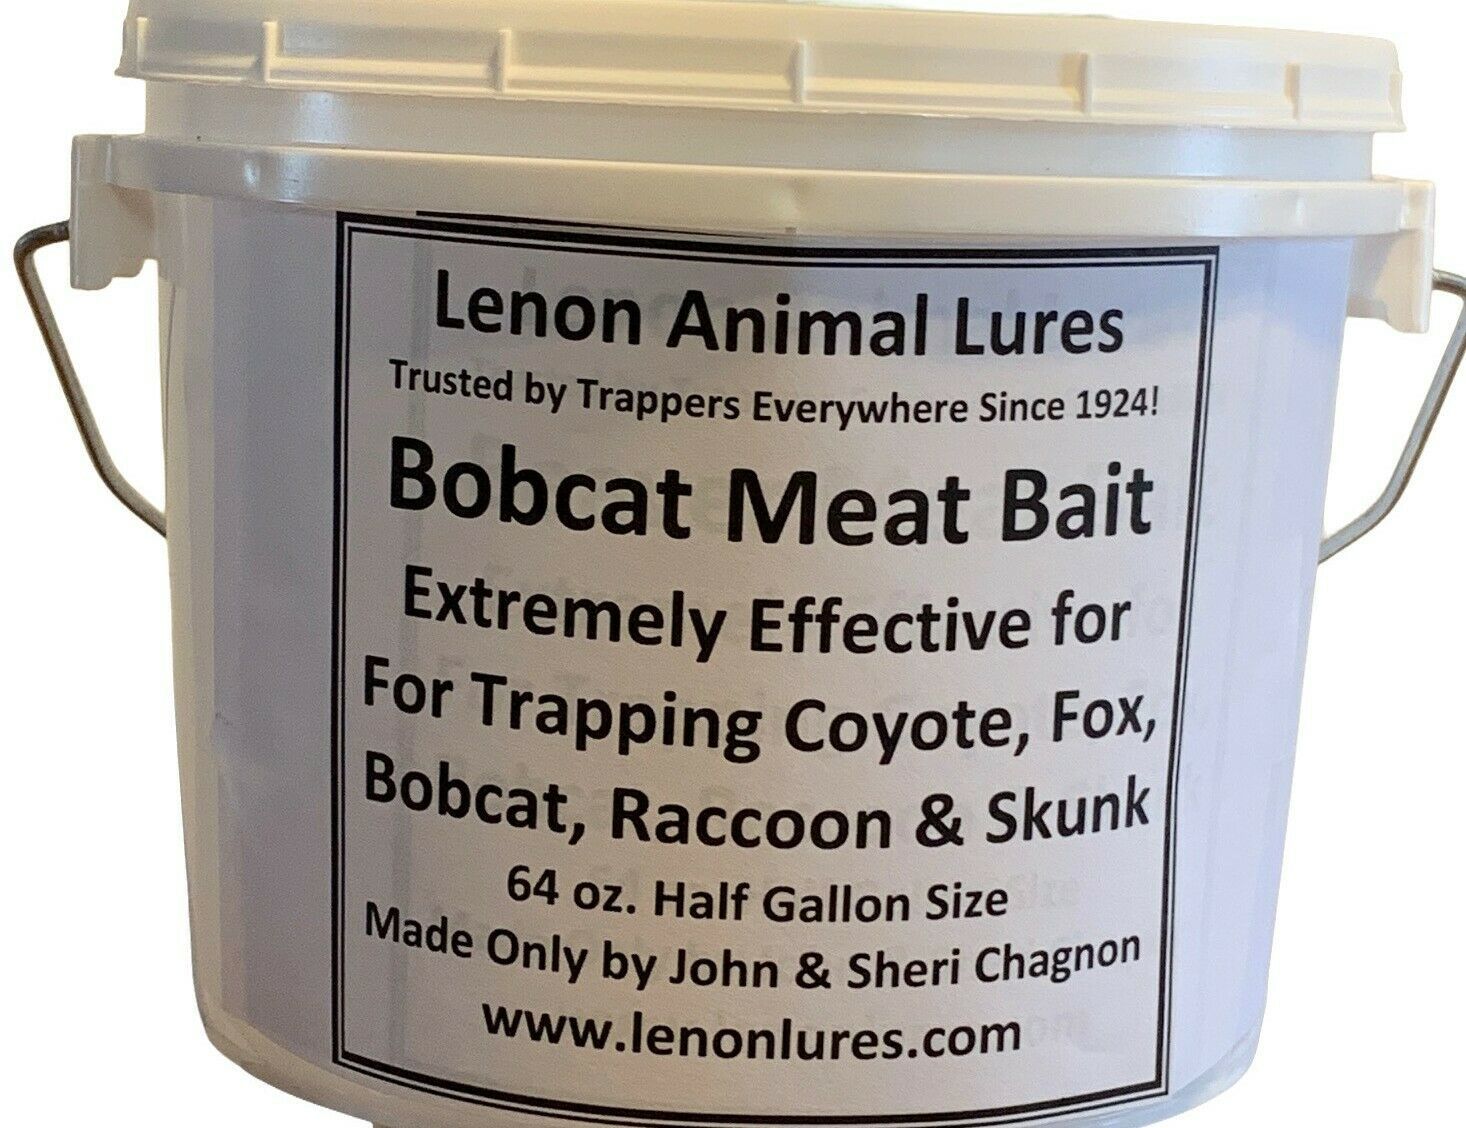 Primary image for Lenon's Bobcat Meat Bait - Fox and Coyote Trapping Bait - 4 lb Jar